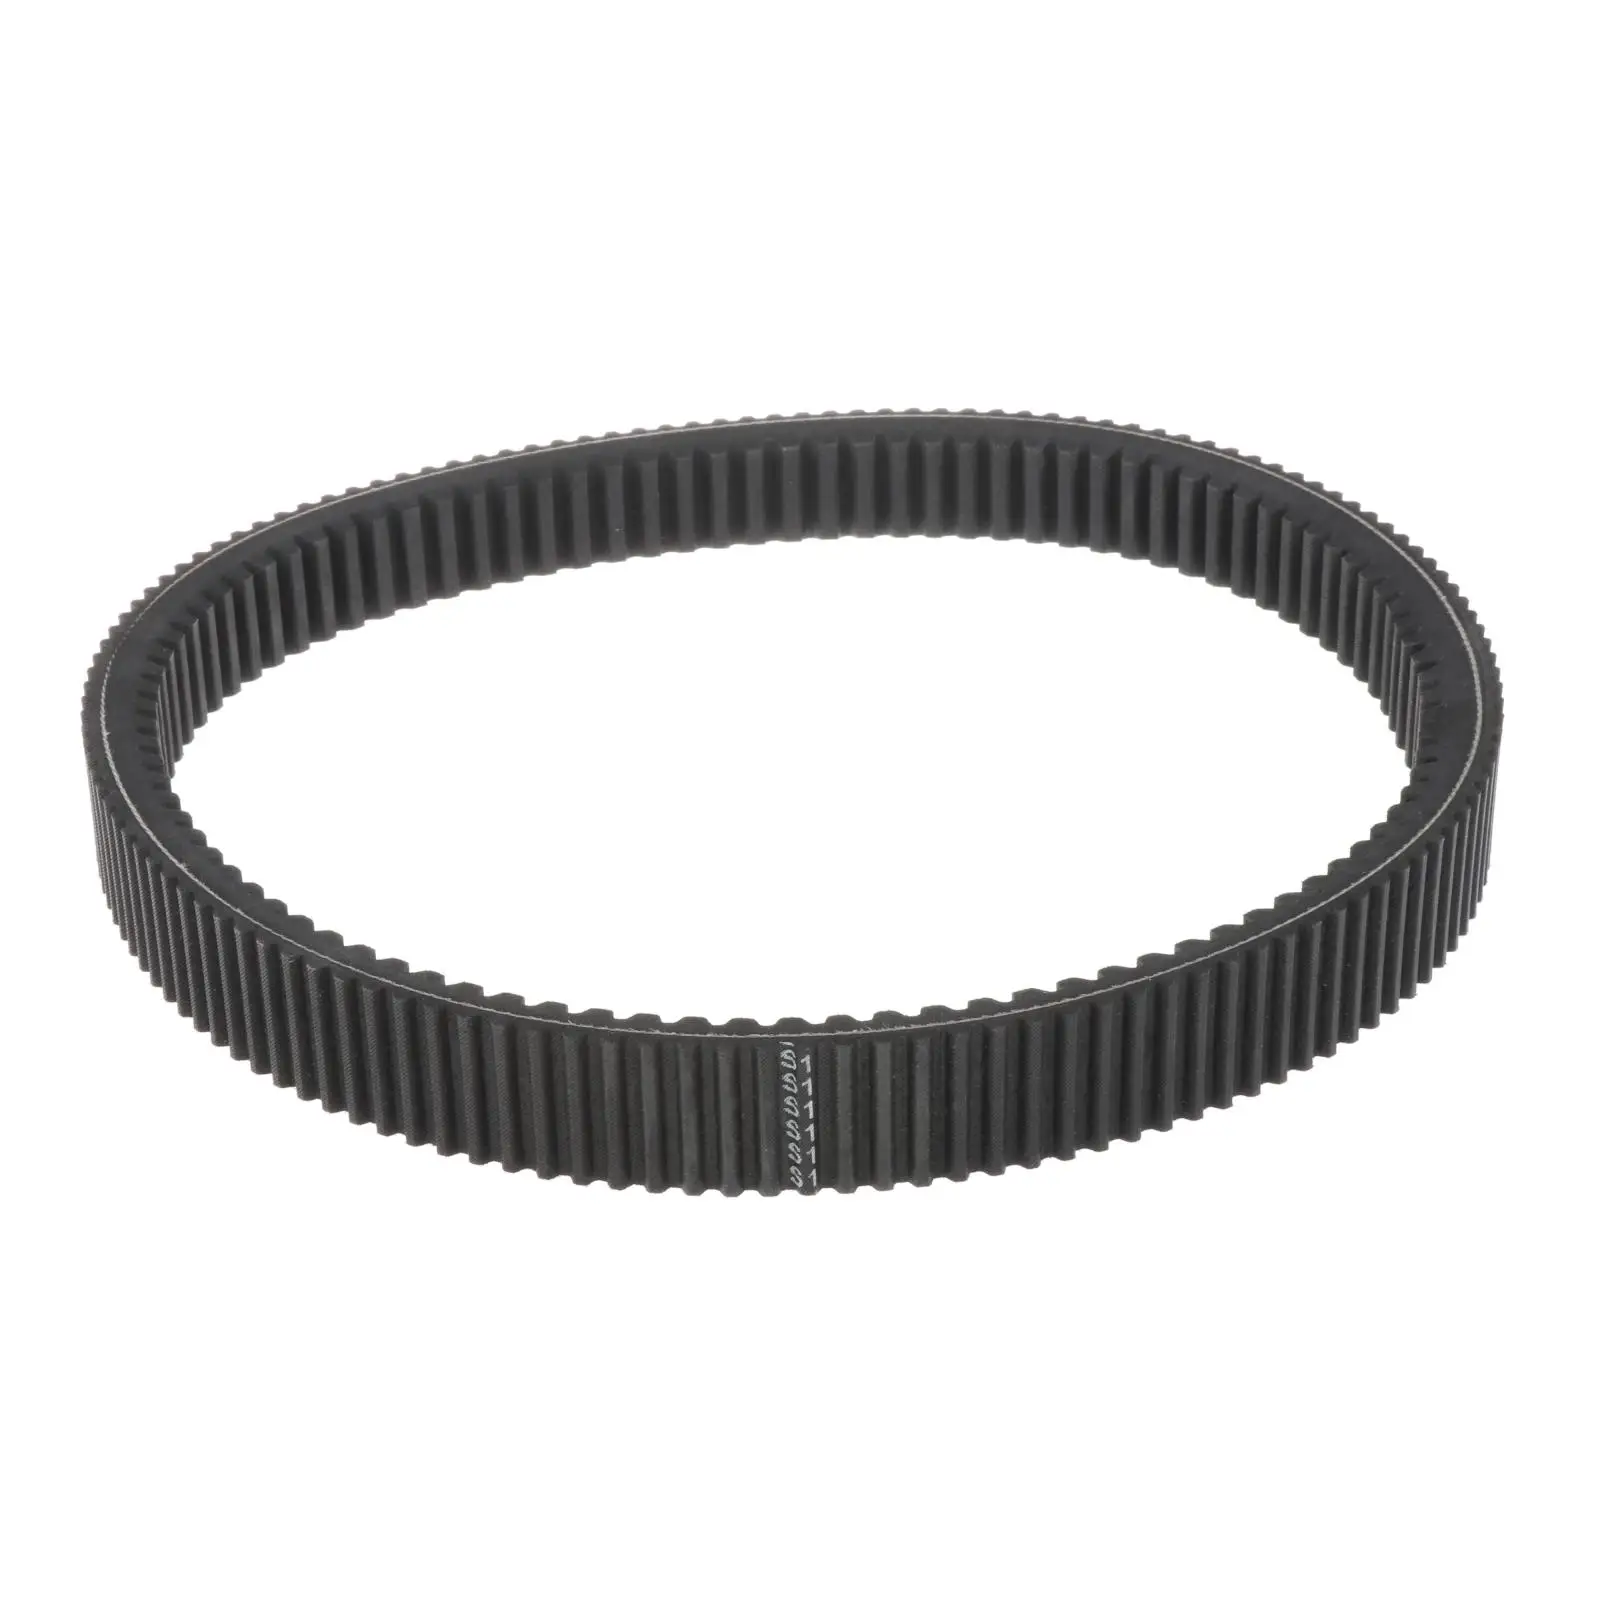 New Snowmobile Performance Drive Belt Double-Sided Replace 417300571 for Ski-Doo 850 E-TEC